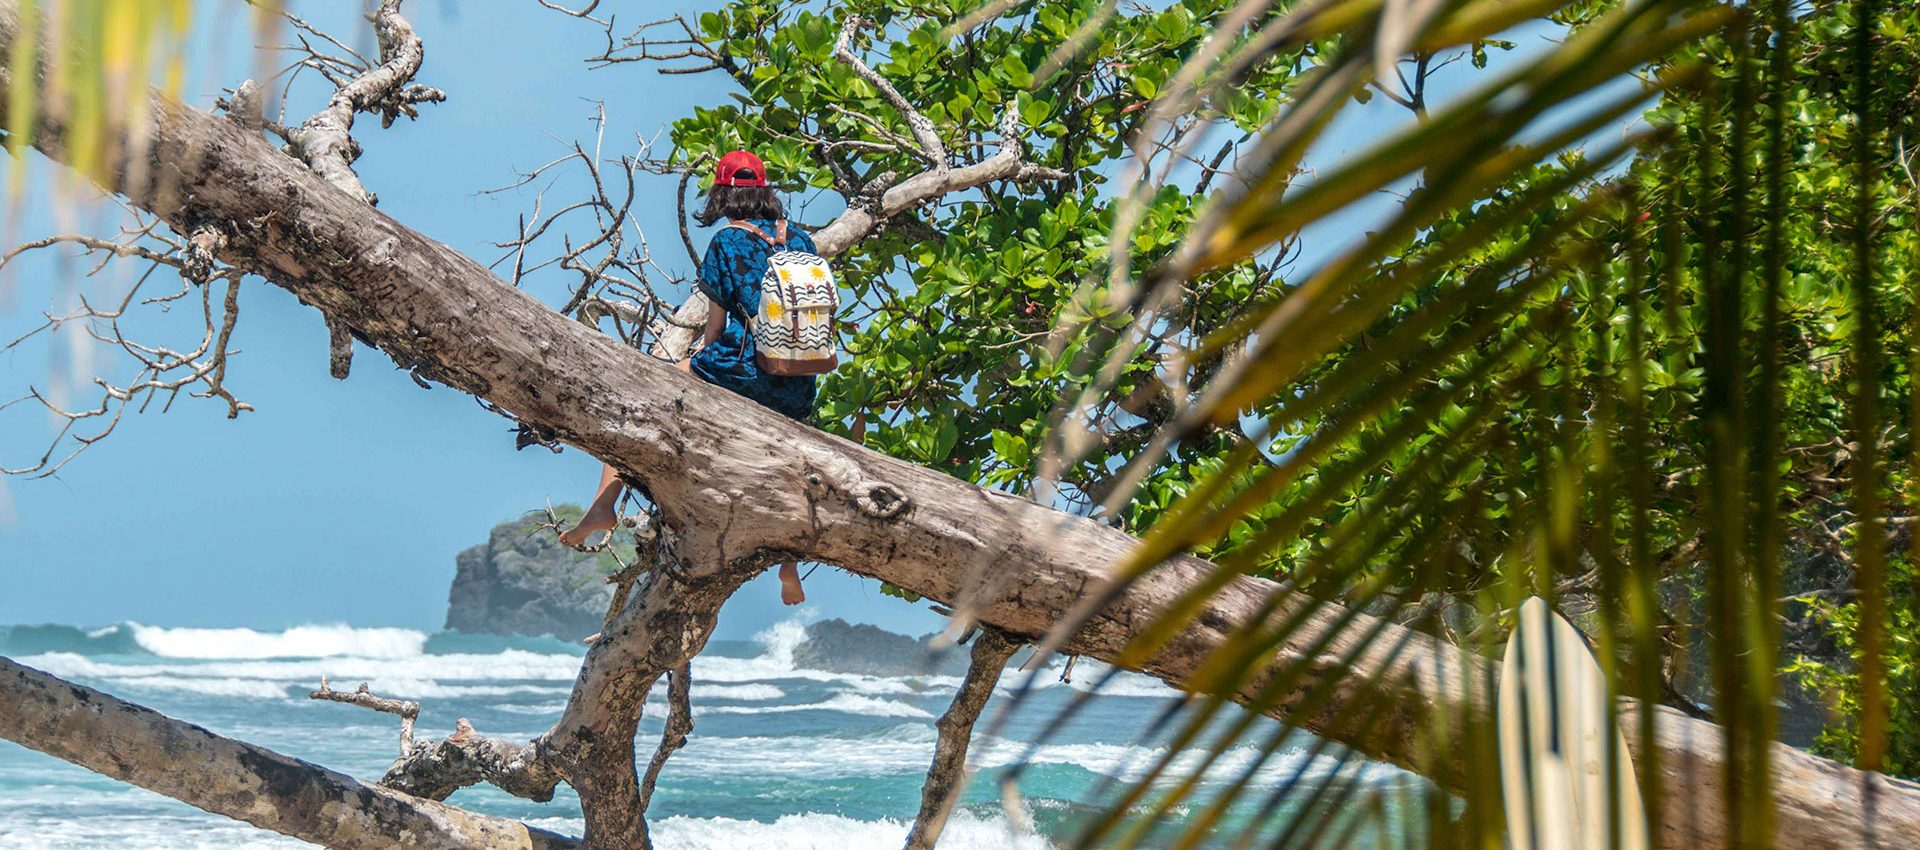 Fallen trees on the beach serve as the perfect lockout to check on the waves and to chill.